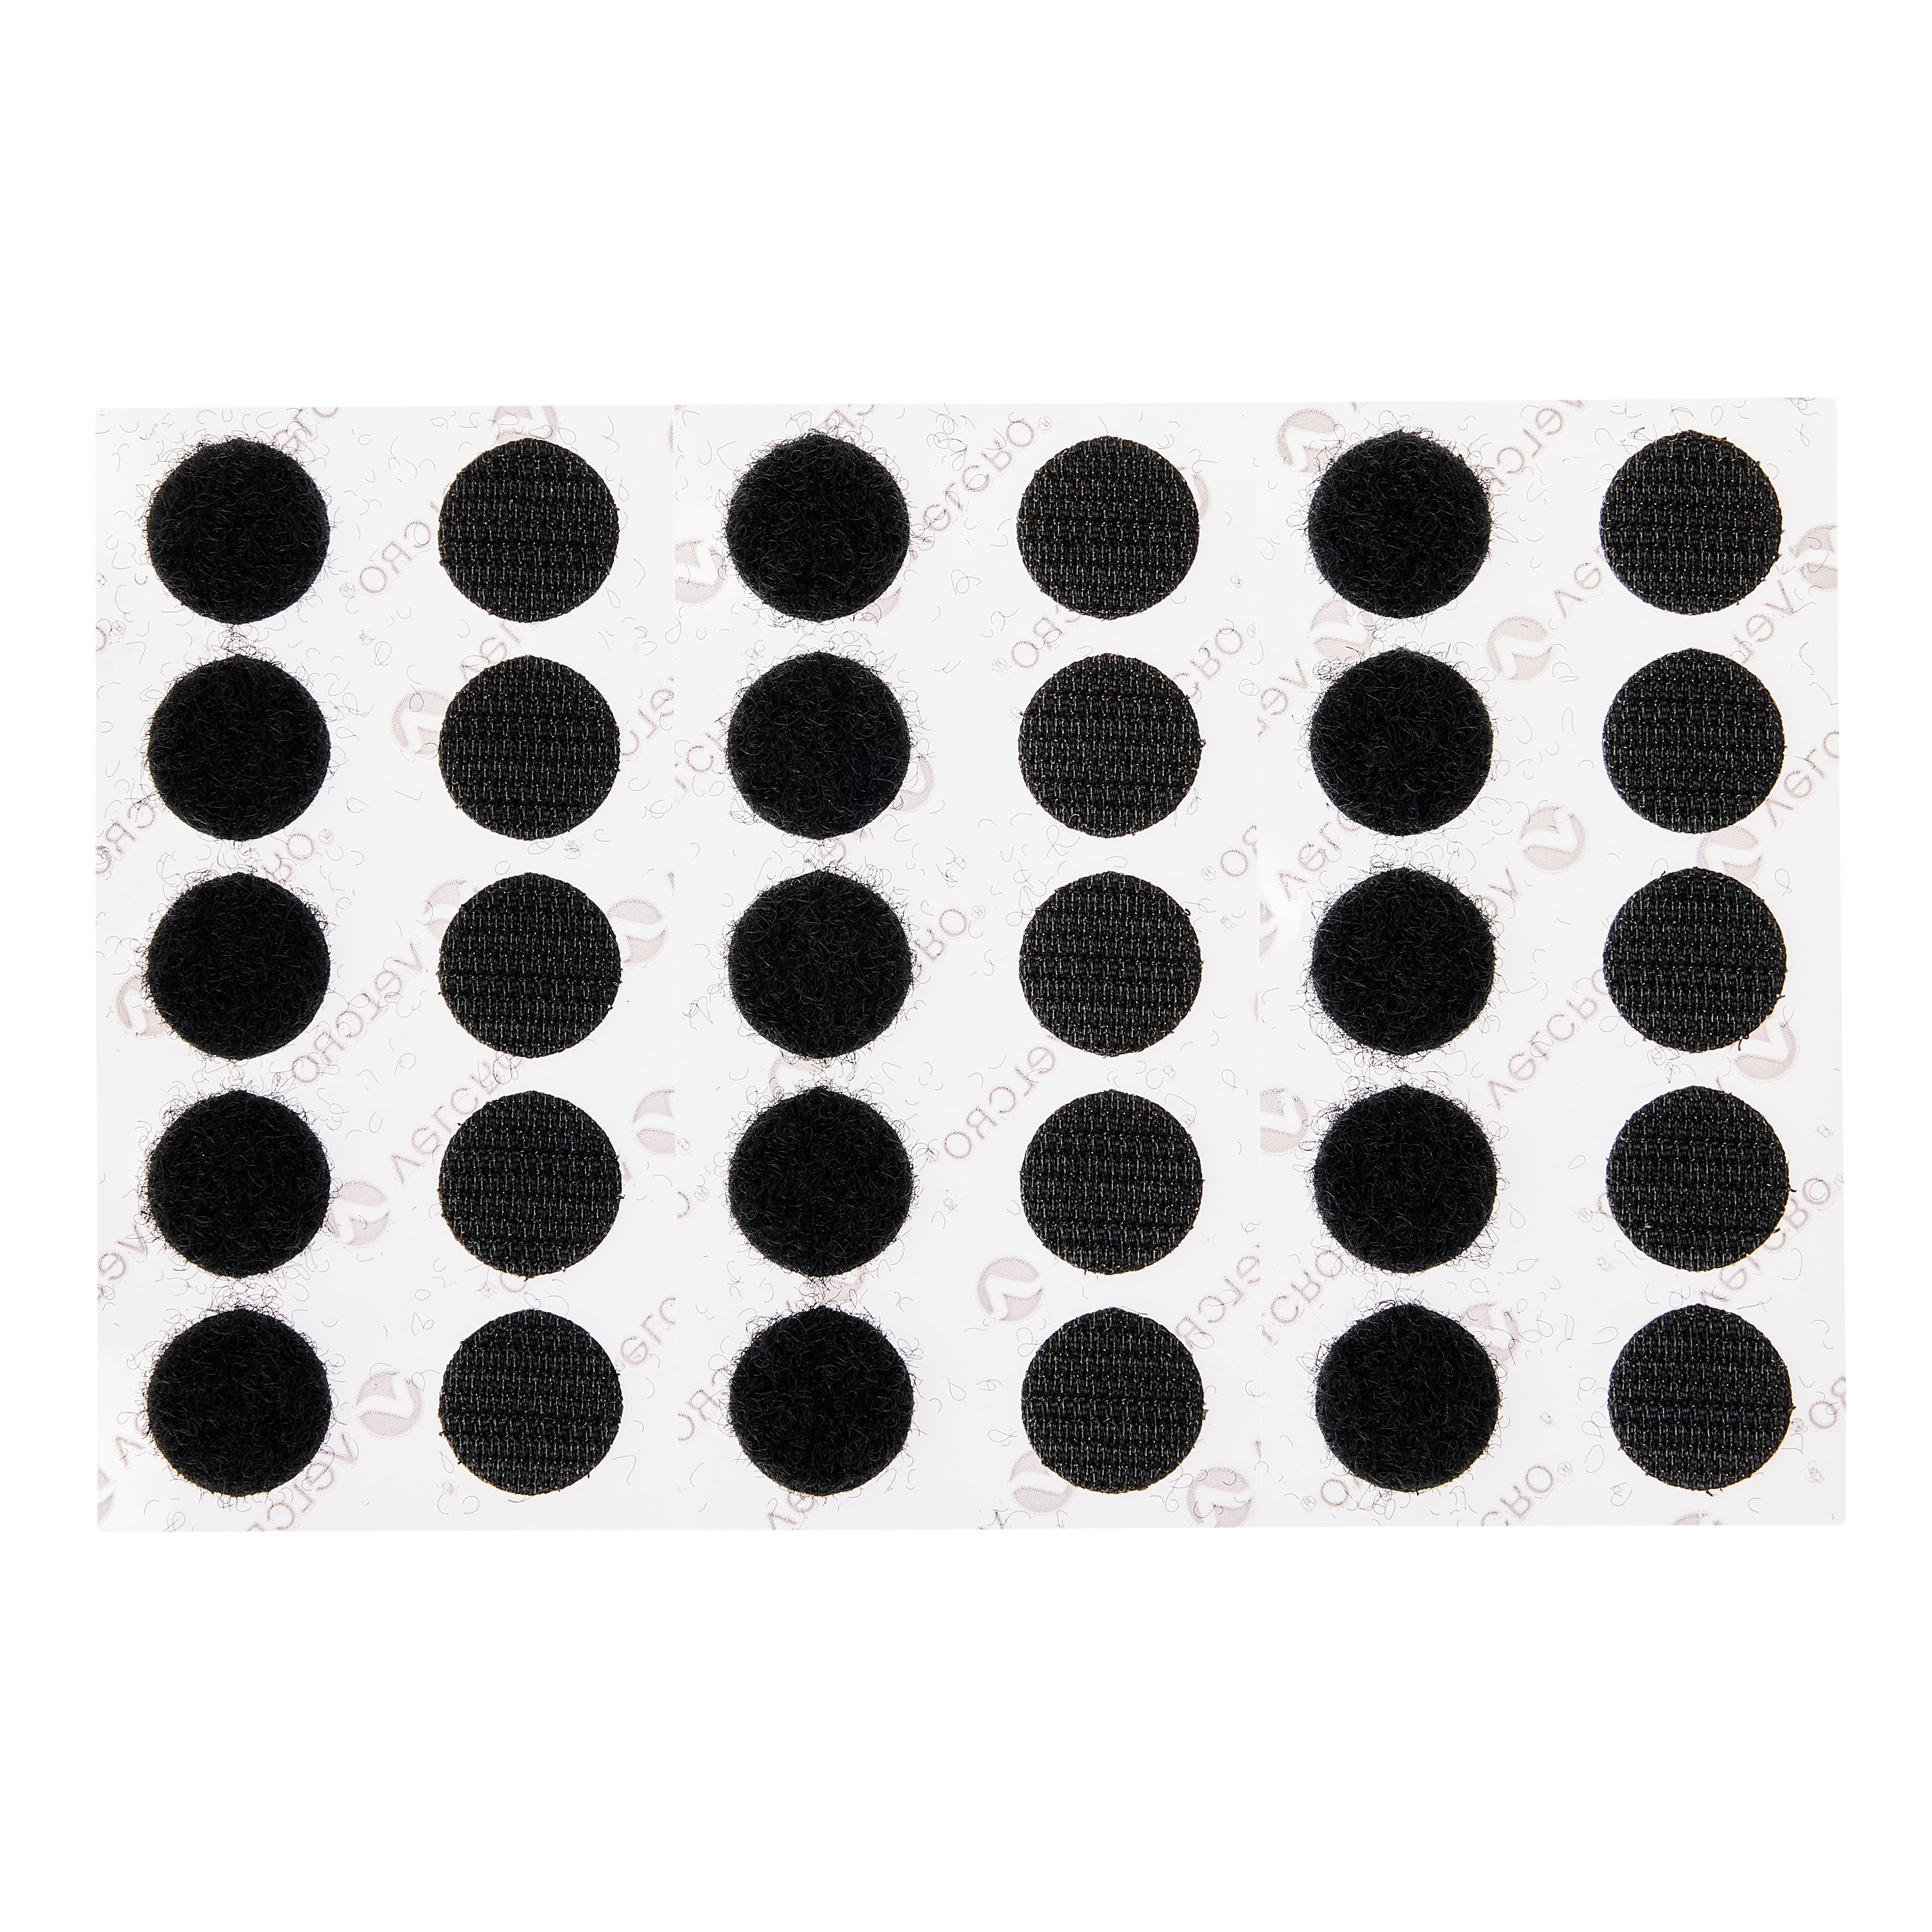 Shans Crafts Store - VELCRO DOTS / 10 PAIRS SELF ADHESIVE 10MM   adhesive/velcro-dots-10-pairs/